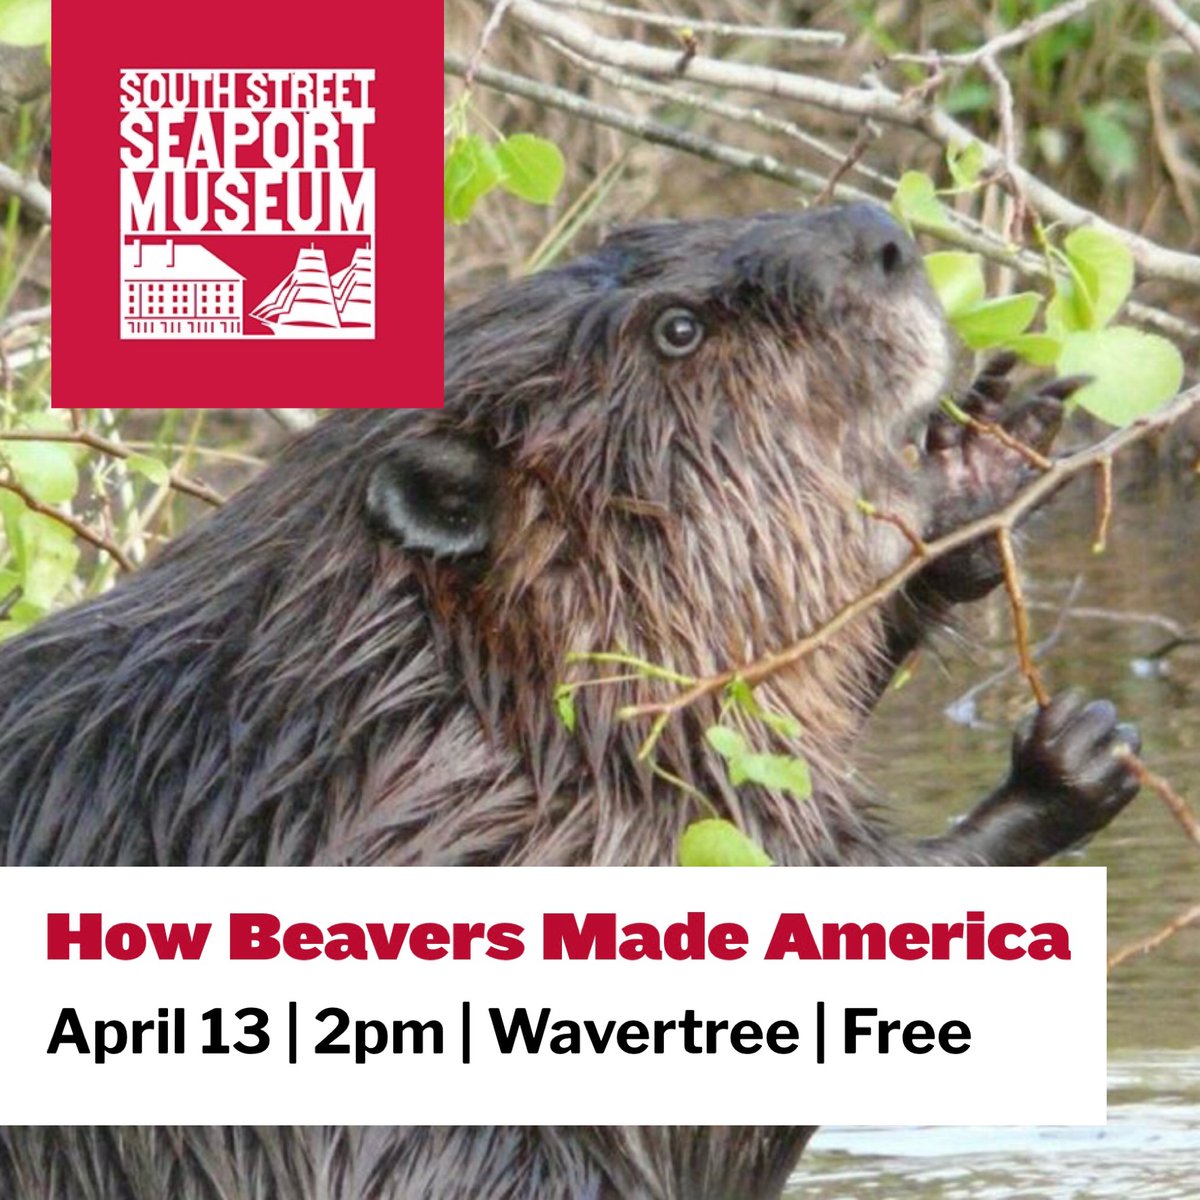 This Saturday I will be giving a talk about beavers and the New York Harbor at the South Street Seaport. My talk will be on board the Wavertree. I can’t wait. 2 PM. Free and open to the public. Come join us at this incredible museum overlooking the harbor.